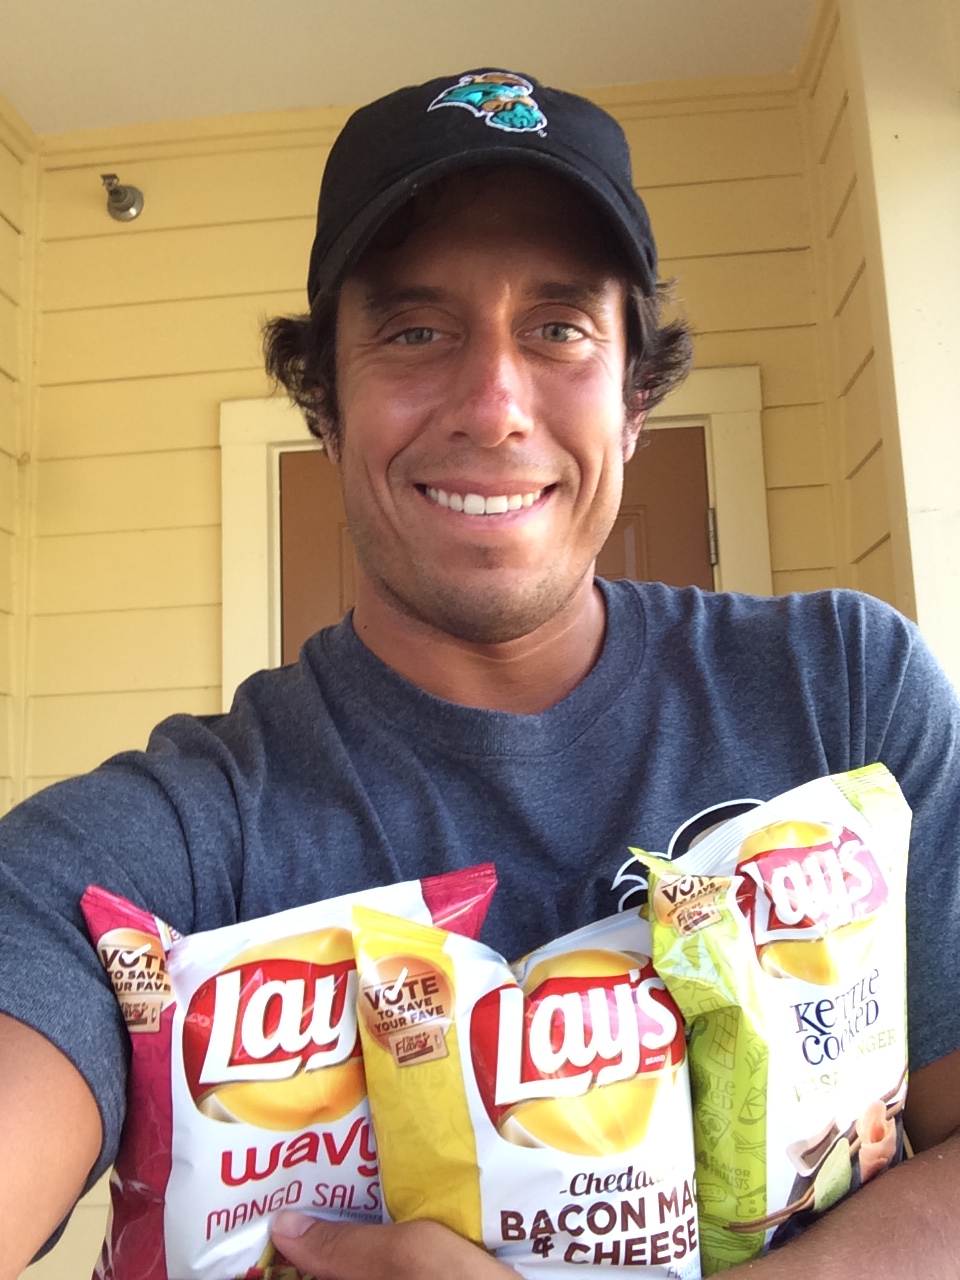 I got my hands on three of the #DoUsAFlavor Lay's potato chips.